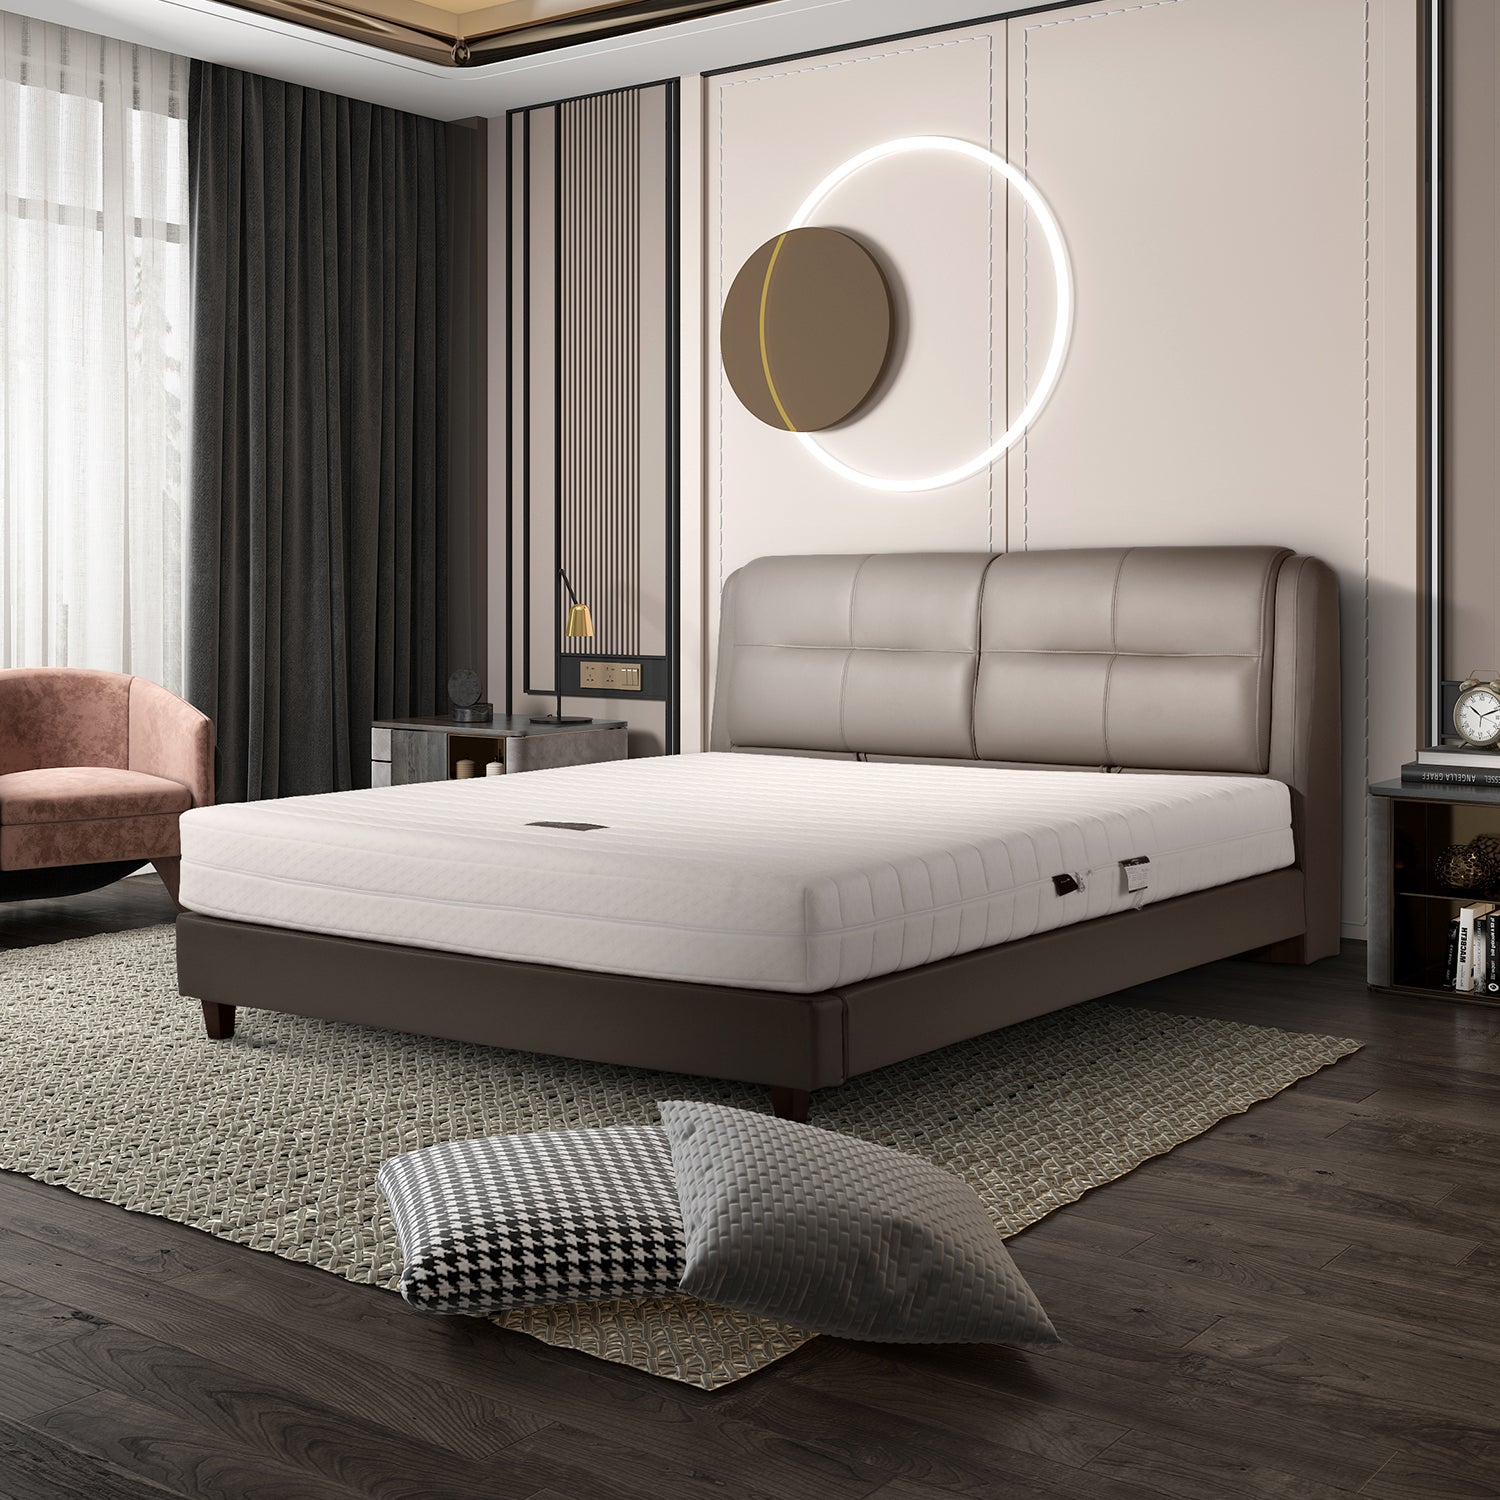 Modern bedroom featuring DeRUCCI Bed Frame BZZ4 - 243 with minimalist design and clean lines, upholstered in grey leather, complemented by cozy pillows and contemporary decor.